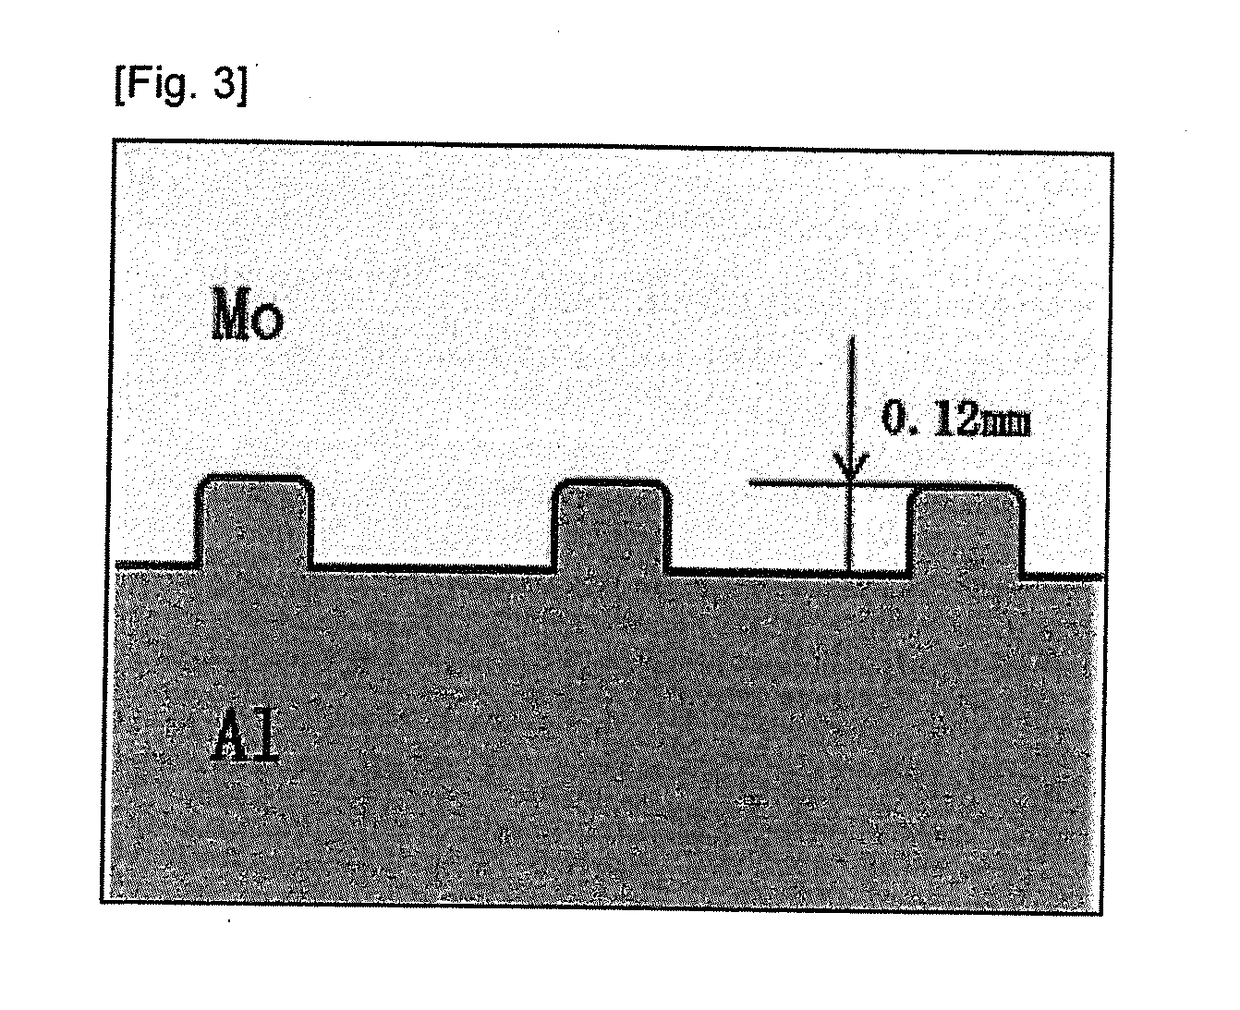 Backing Plate Obtained by Diffusion-Bonding Anticorrosive Metal and Mo or Mo Alloy, and Sputtering Target-Backing Plate Assembly Provided with Said Backing Plate